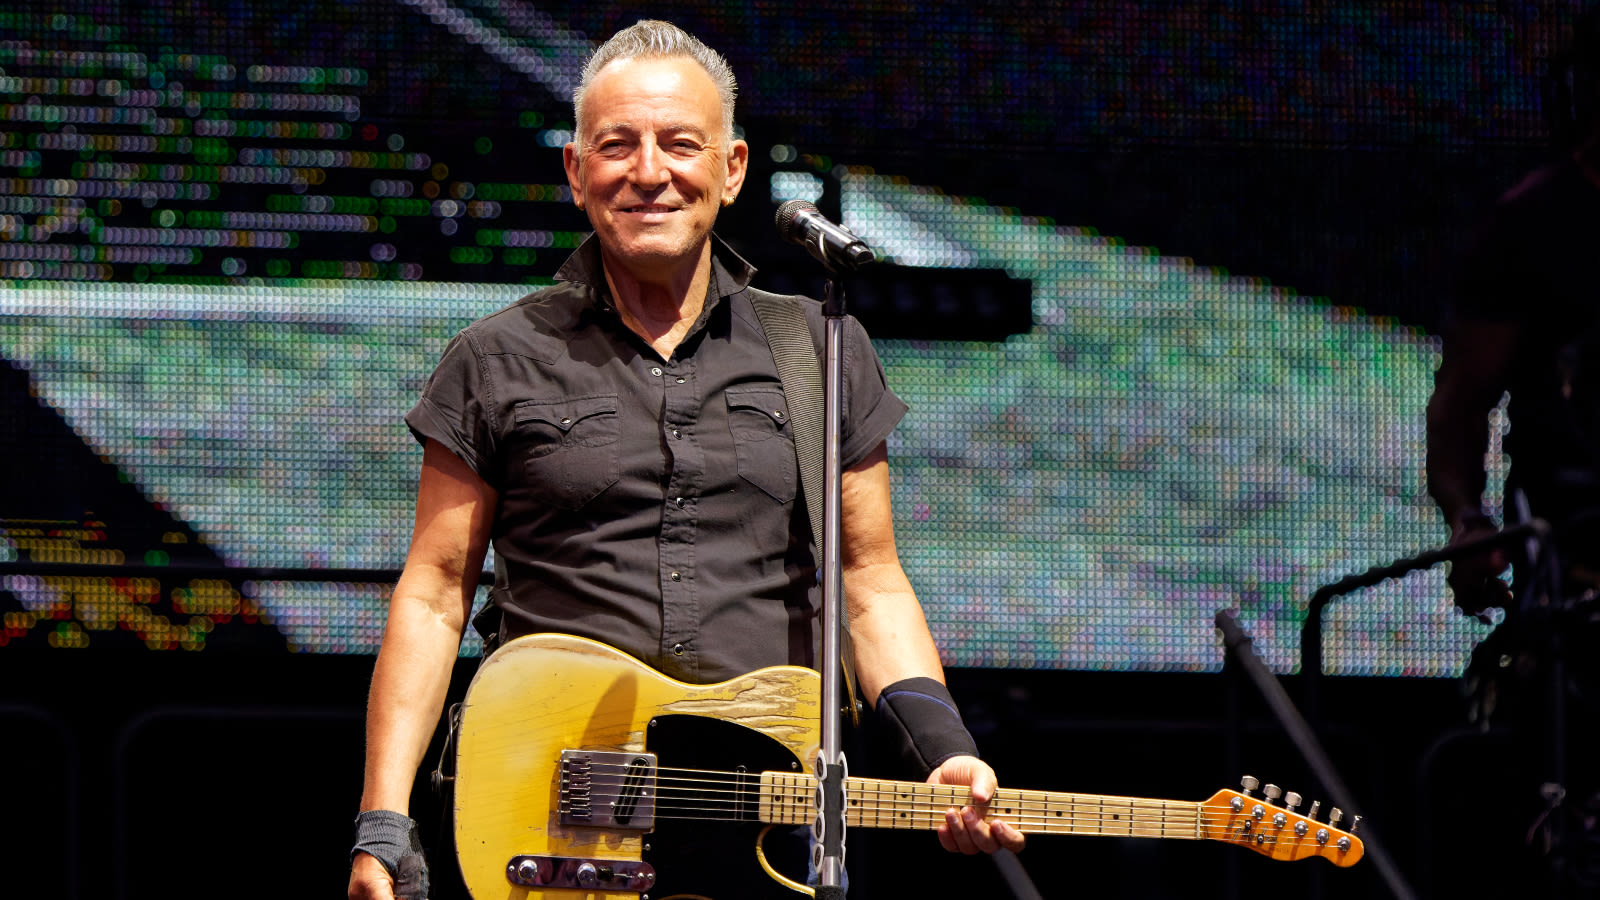 Bruce Springsteen cancels tour dates after 'being taken ill' ITV News